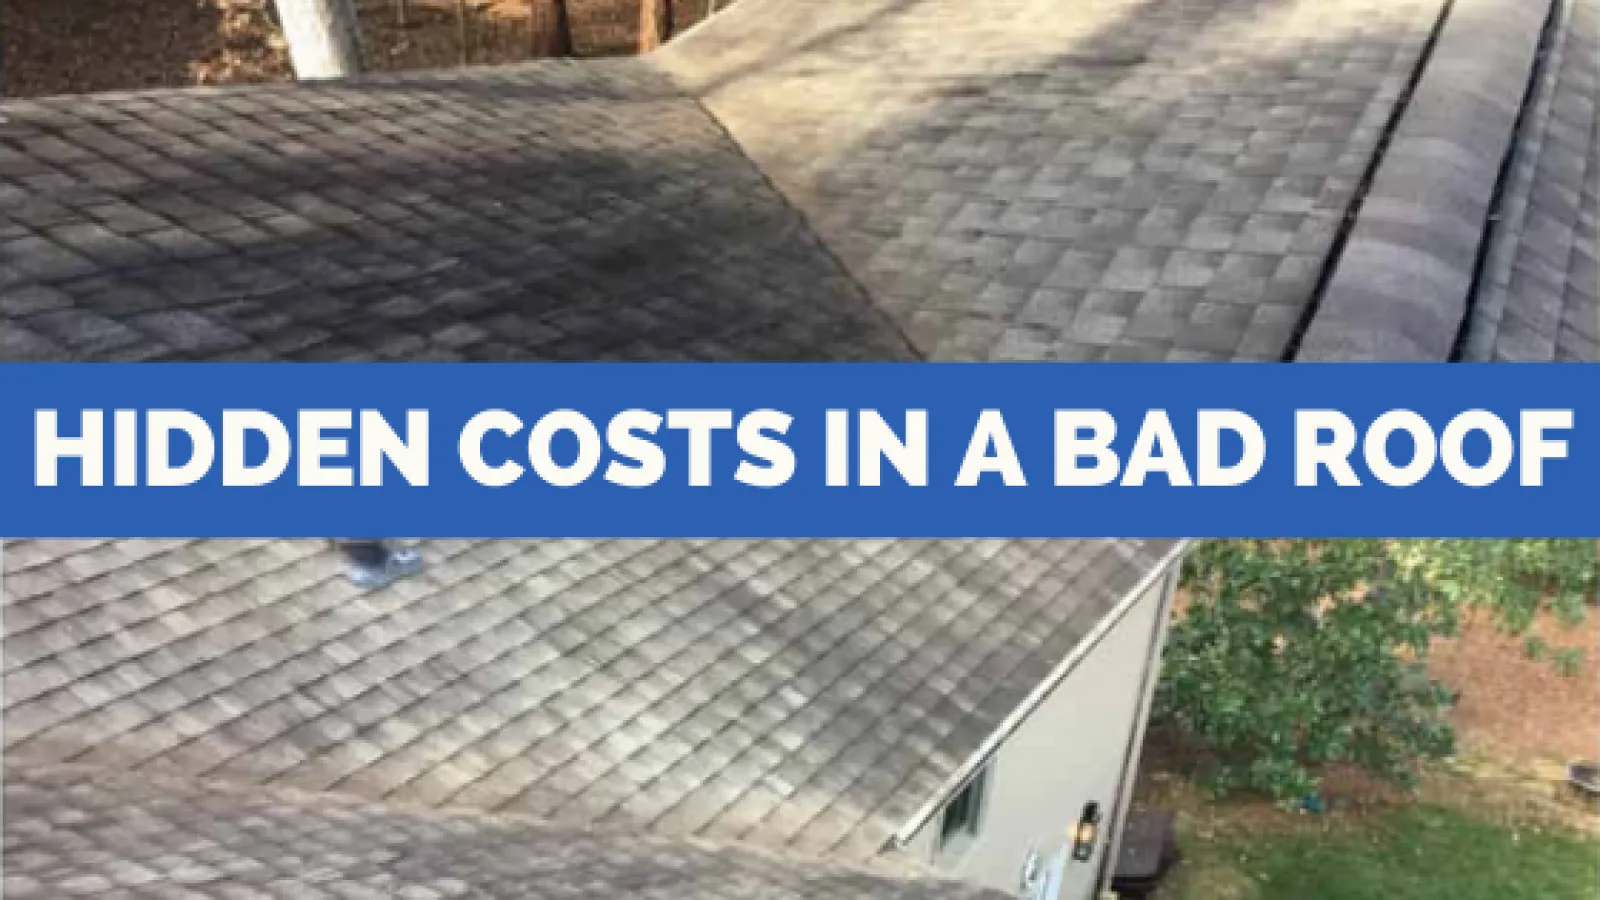 What are the Hidden Costs in a Bad Roof?